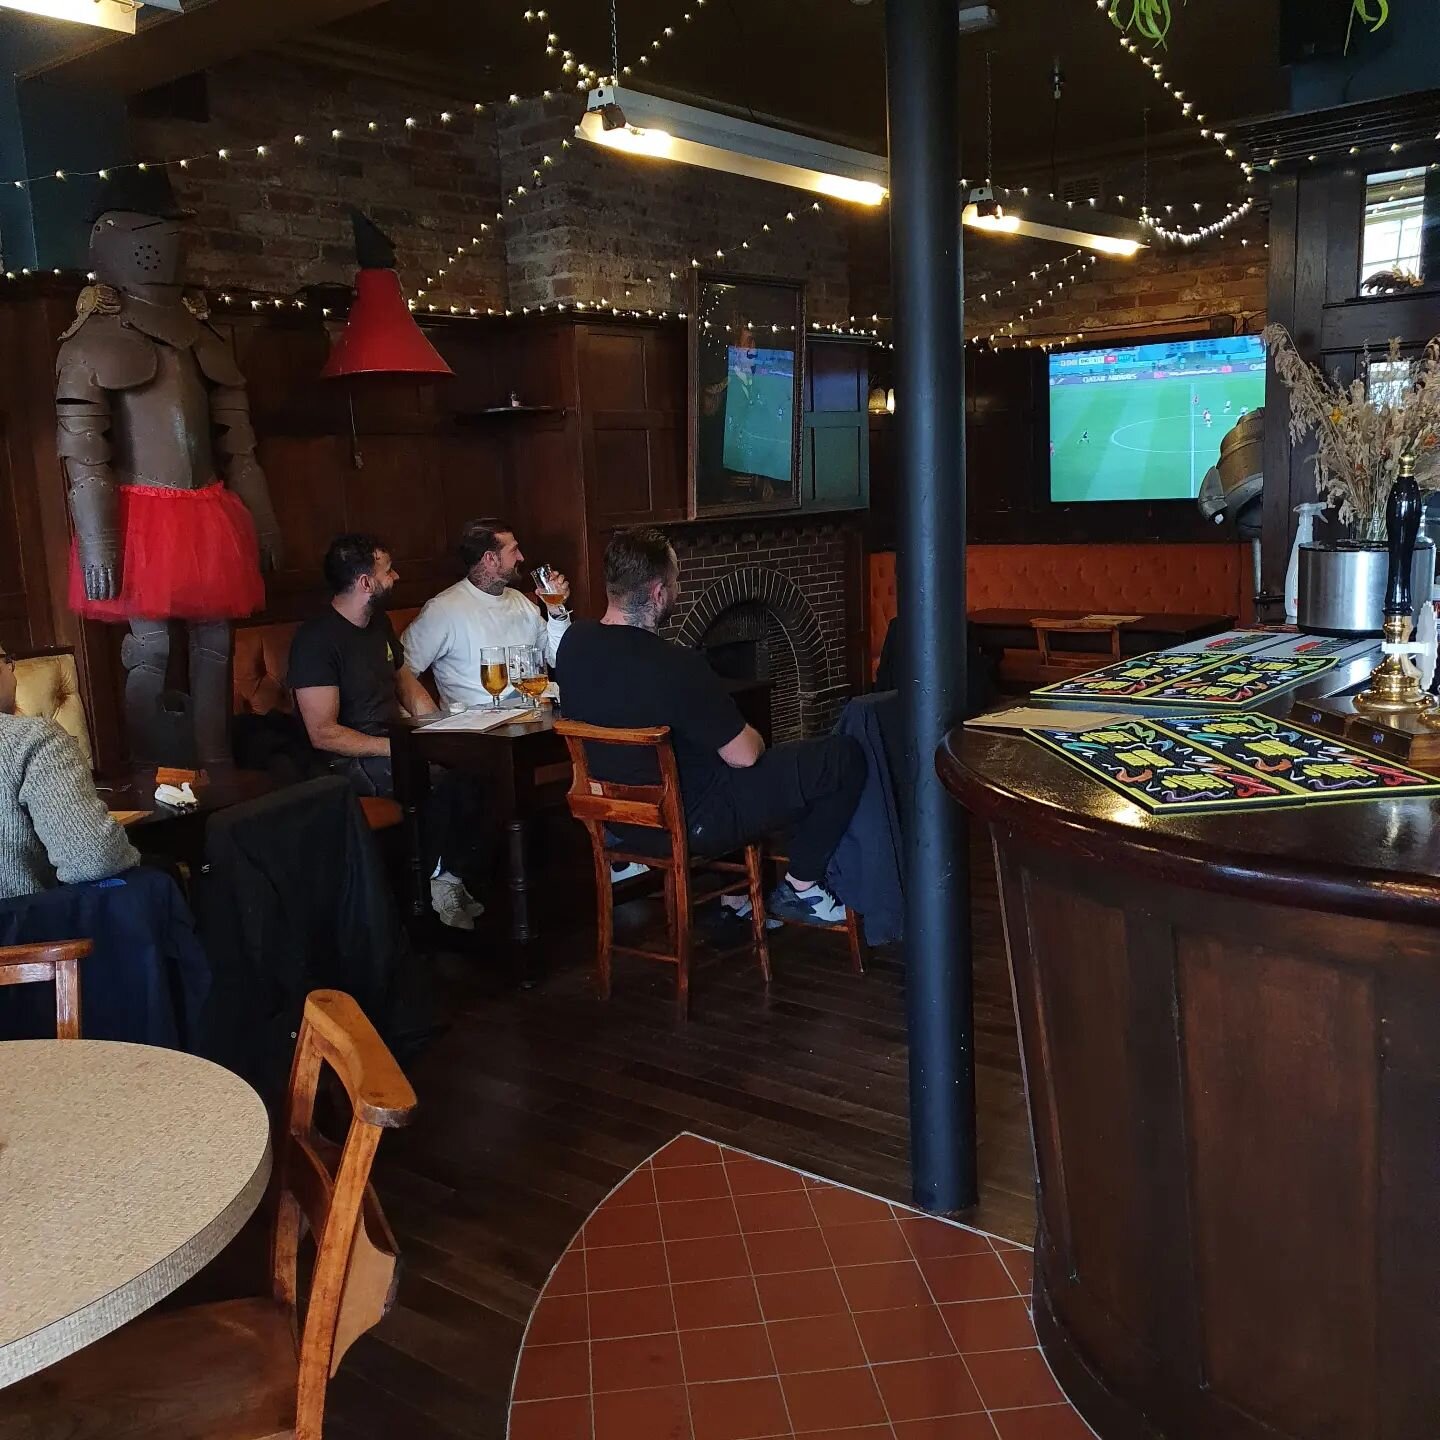 What a great turnout for England's first game 🏴󠁧󠁢󠁥󠁮󠁧󠁿 

There's nothing better than watching the footy on the big screen with a pint and a @moyosburgersbrighton

So come along for Friday's game!